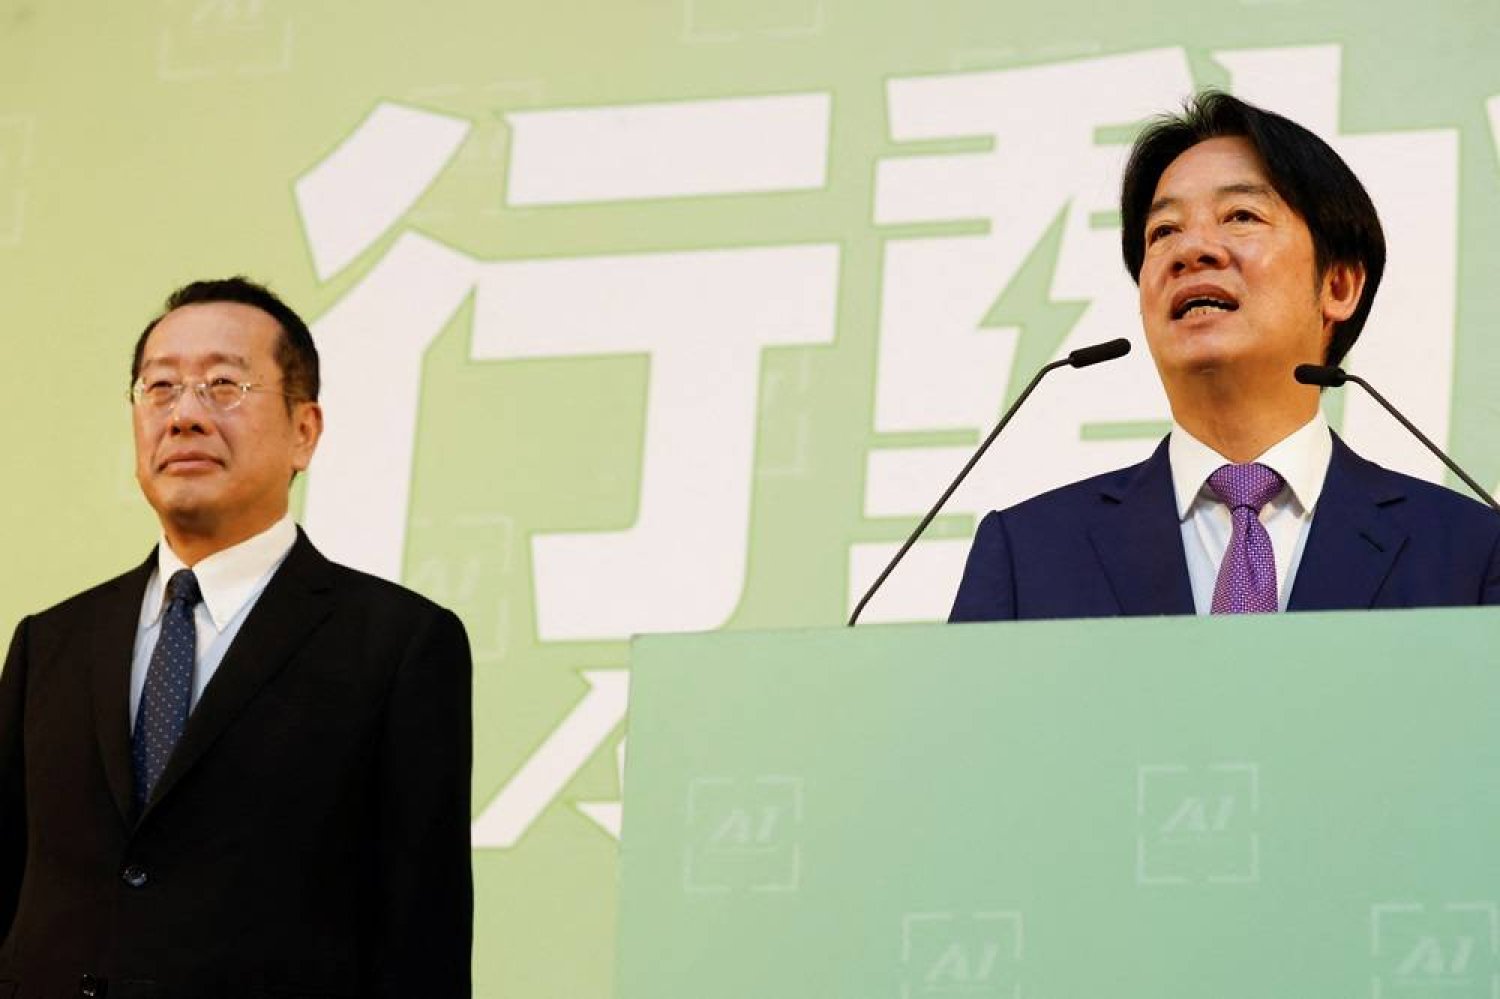  Taiwan President-elect Lai Ching-te speaks as Incoming Defense Minister Wellington Koo stands next to him during a press conference where incoming cabinet members are announced, in Taipei, Taiwan April 25, 2024. (Reuters)